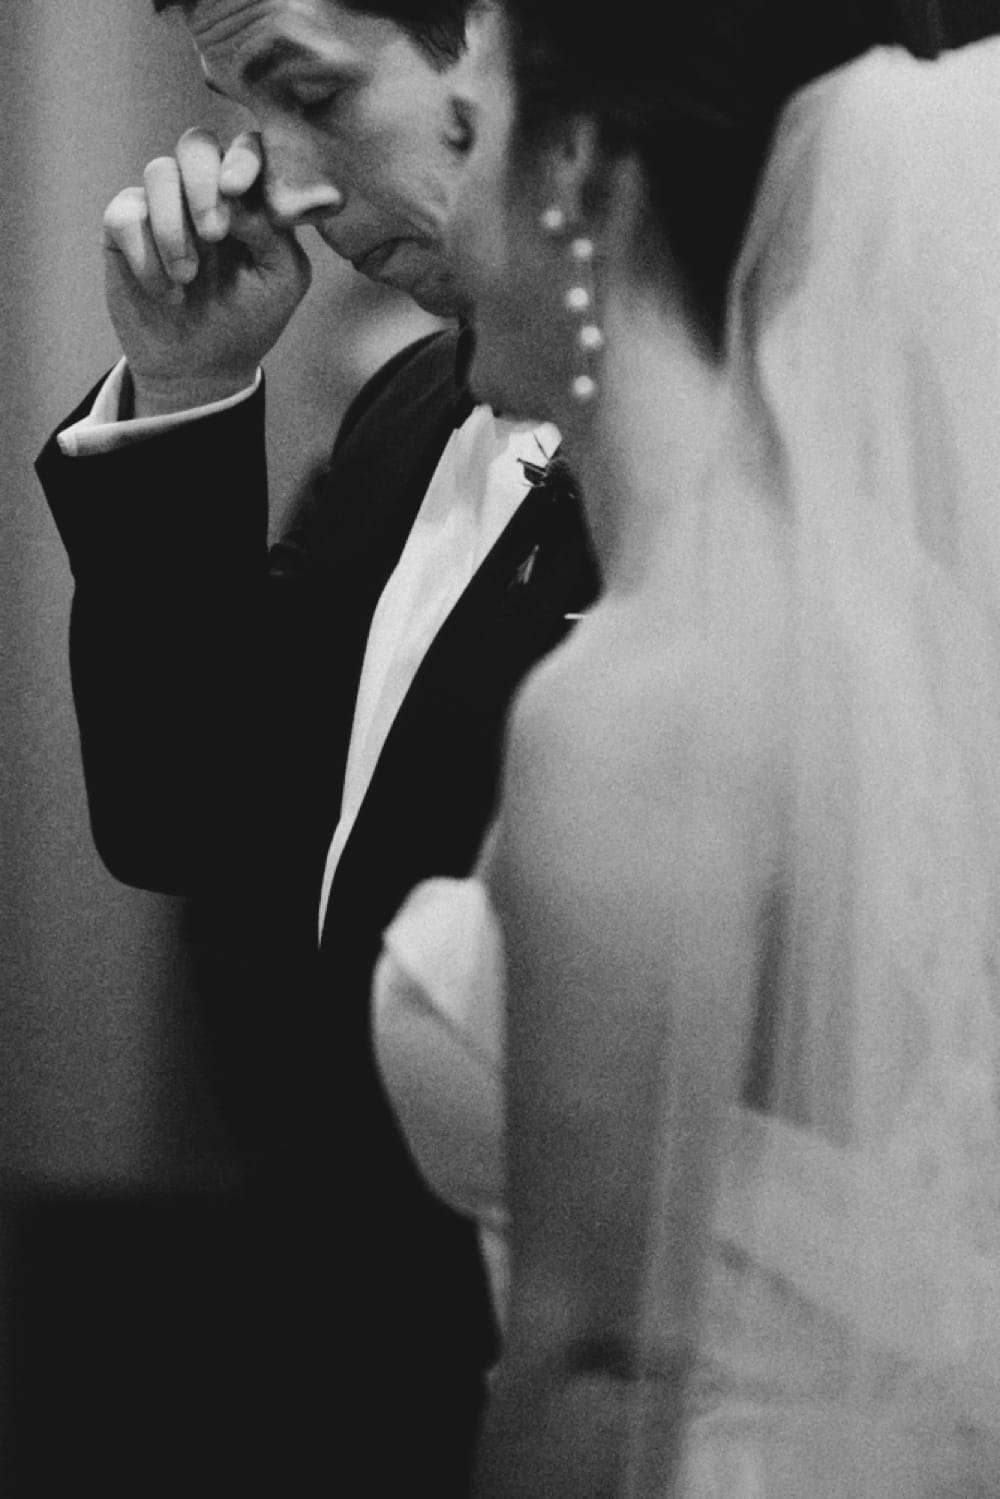 A photojournalistic portrait of a groom wiping away a tear during his wedding ceremony at St. Augustin's Church in Newport, Rhode Island